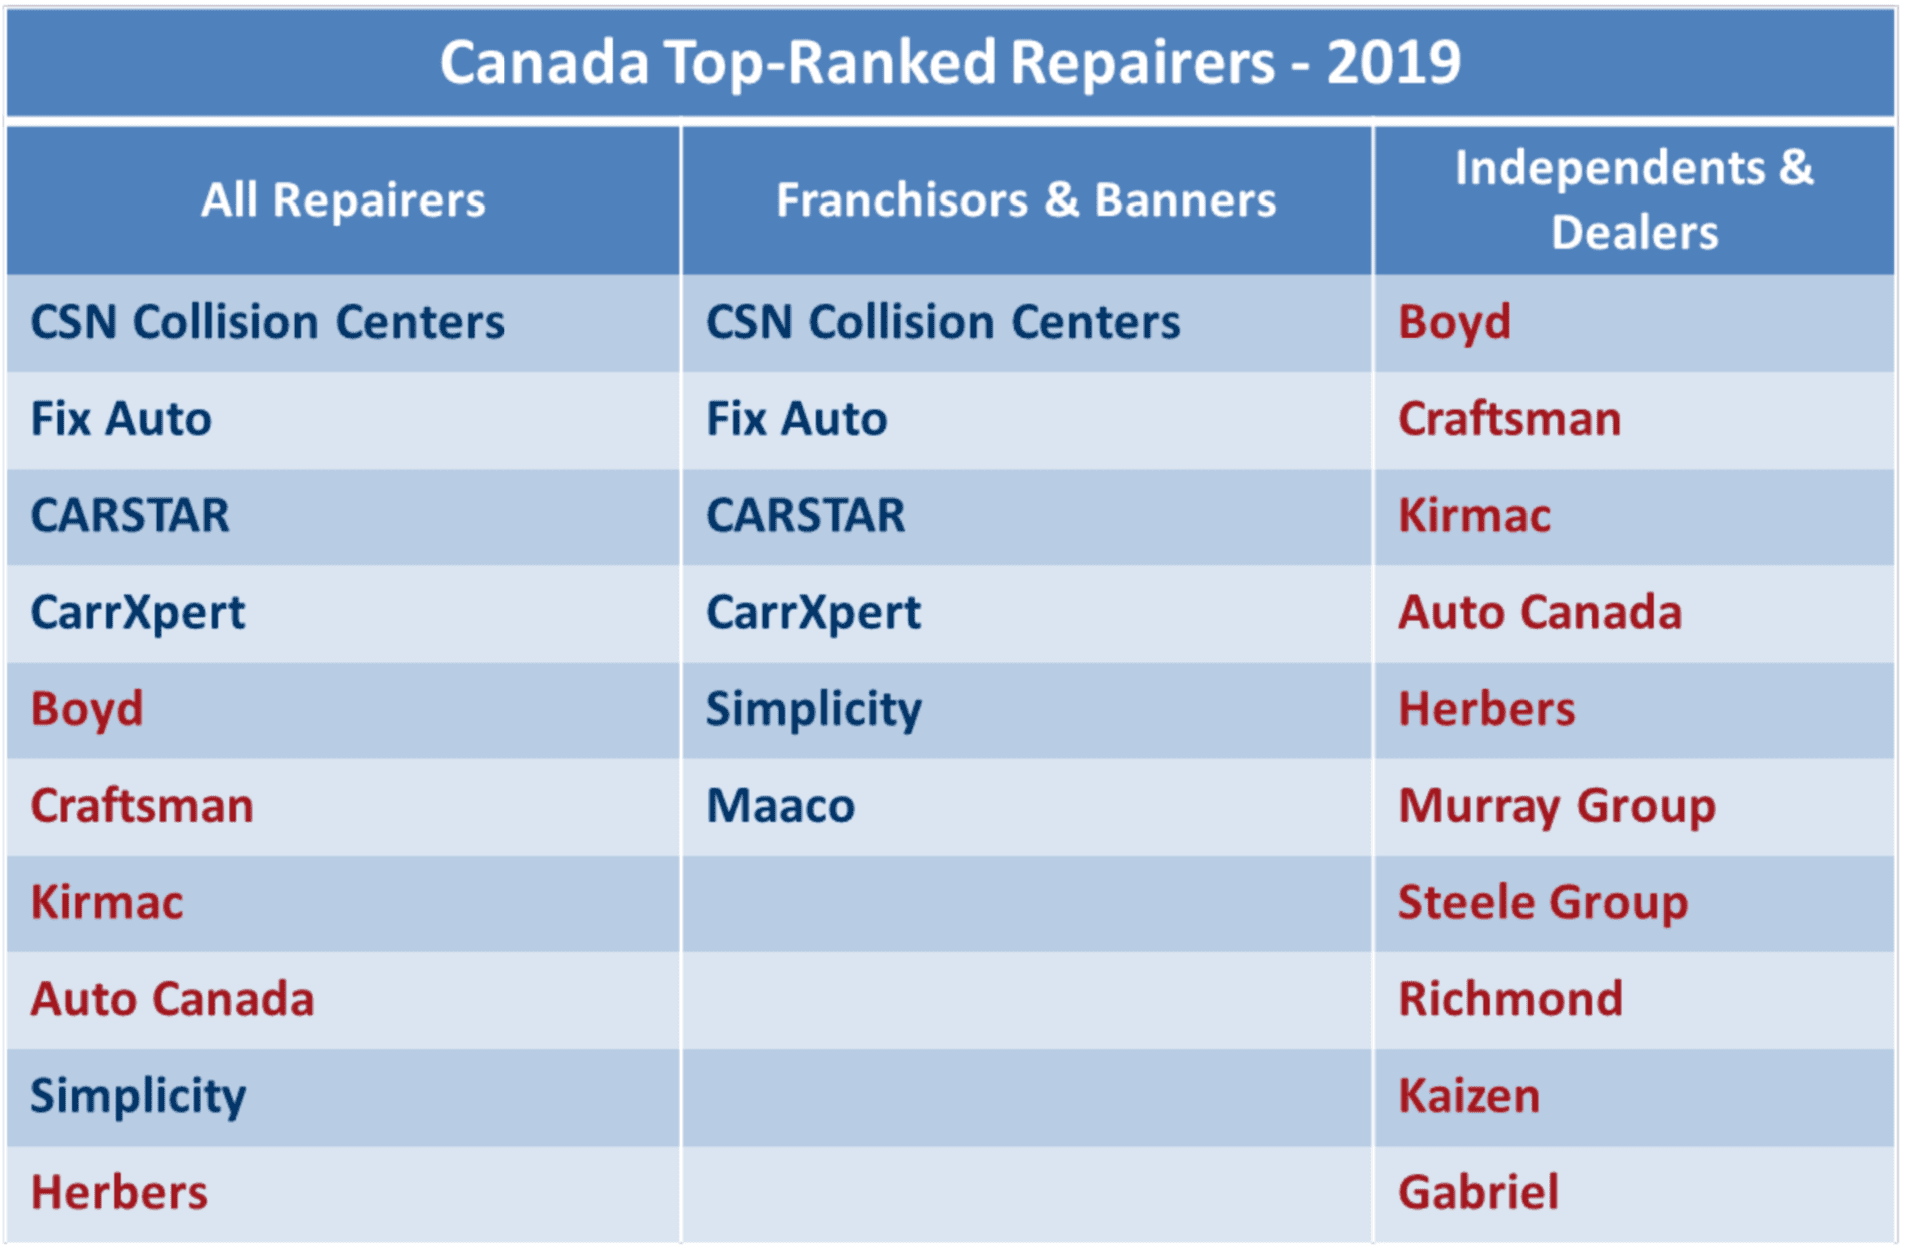 Canada Top-Ranked Repairers 2019